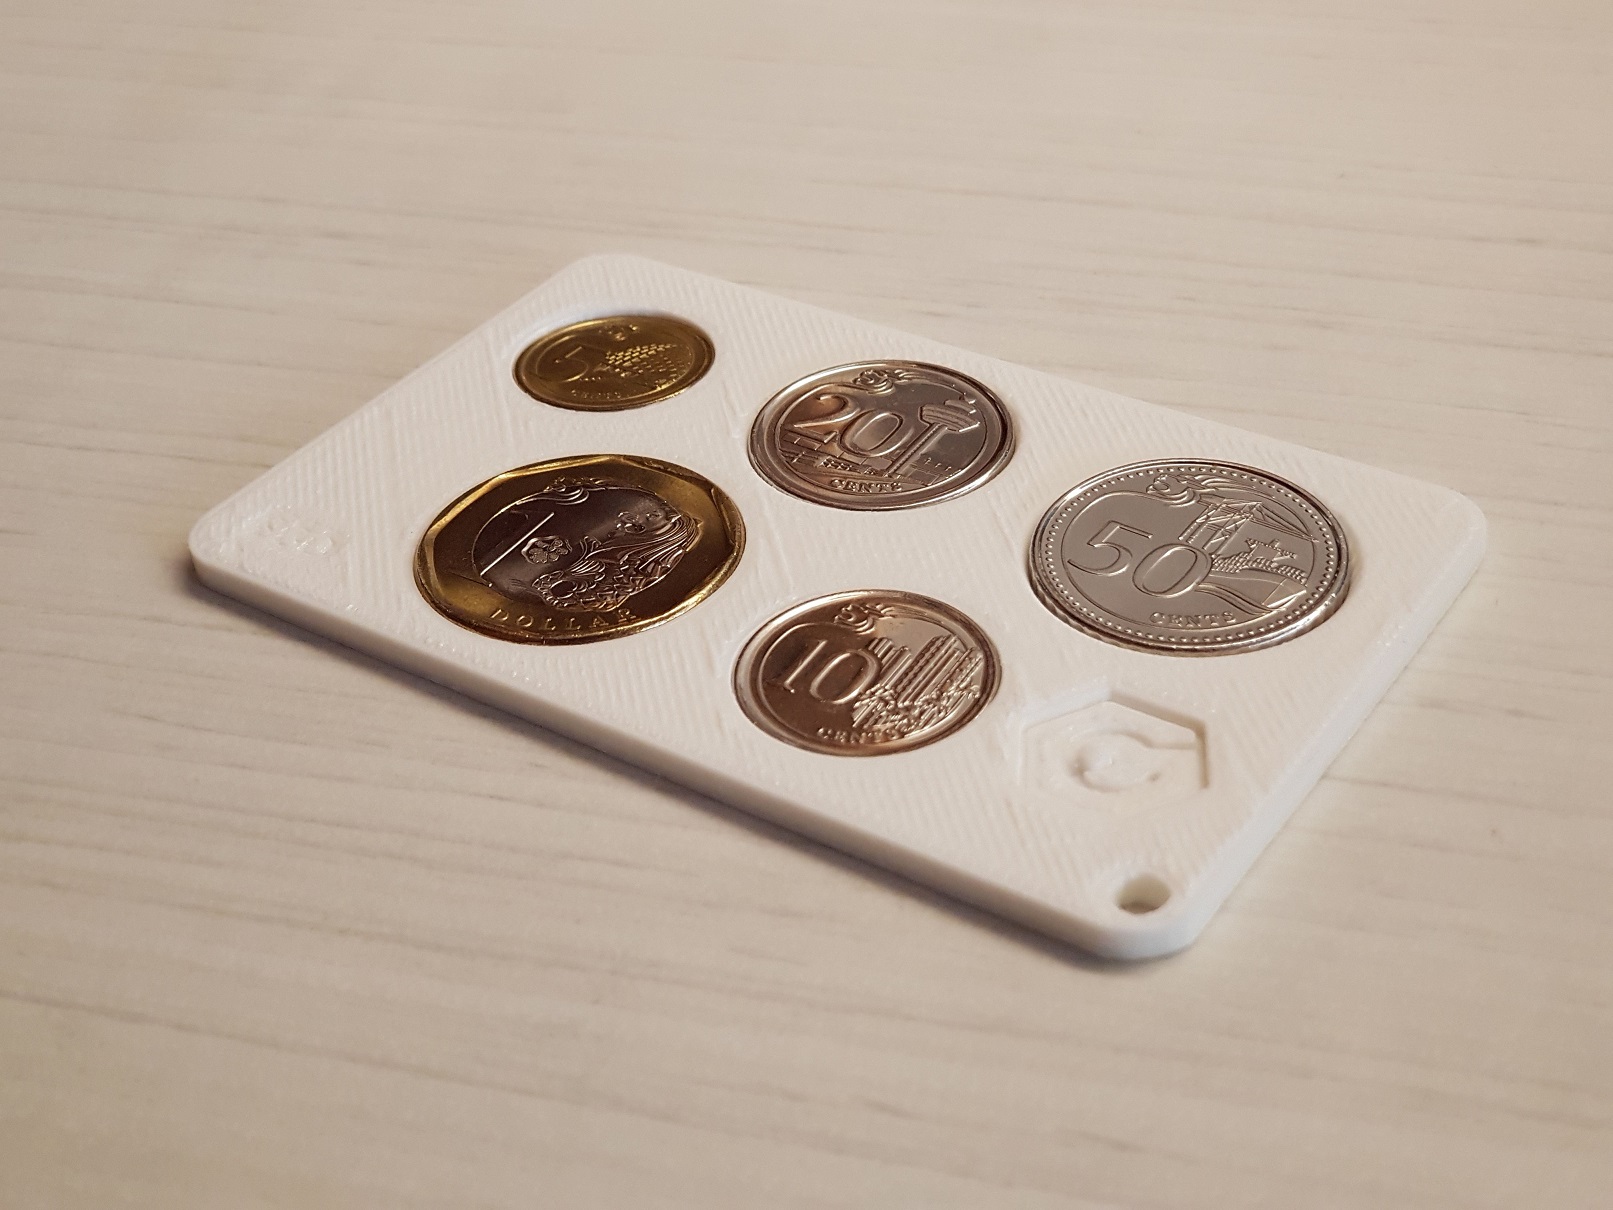 Version 1 of the 3D-printed coin card prototype.